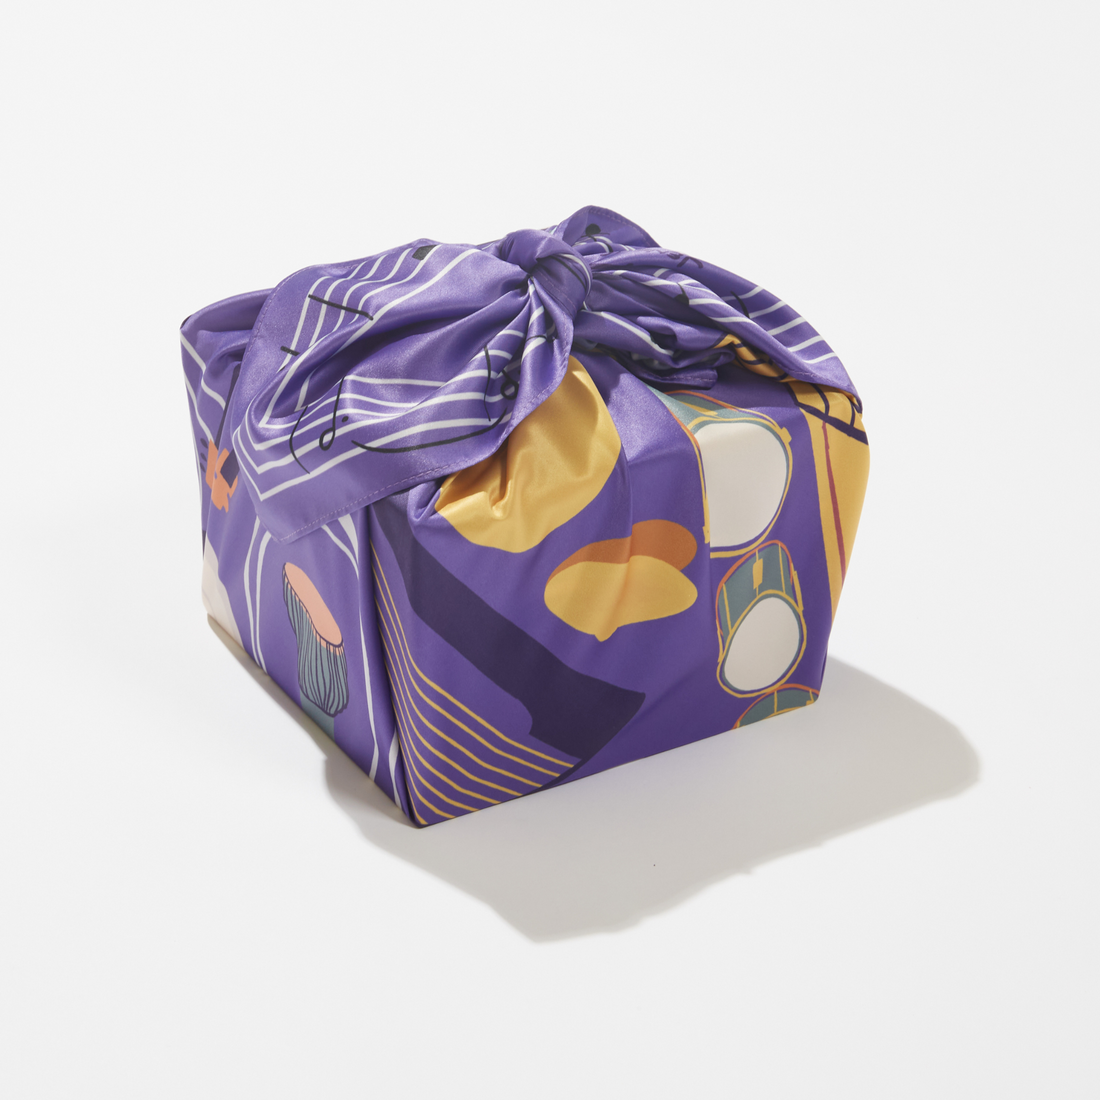 Soundtrack of Love | 28" Furoshiki Gift Wrap by Janelle Lewis